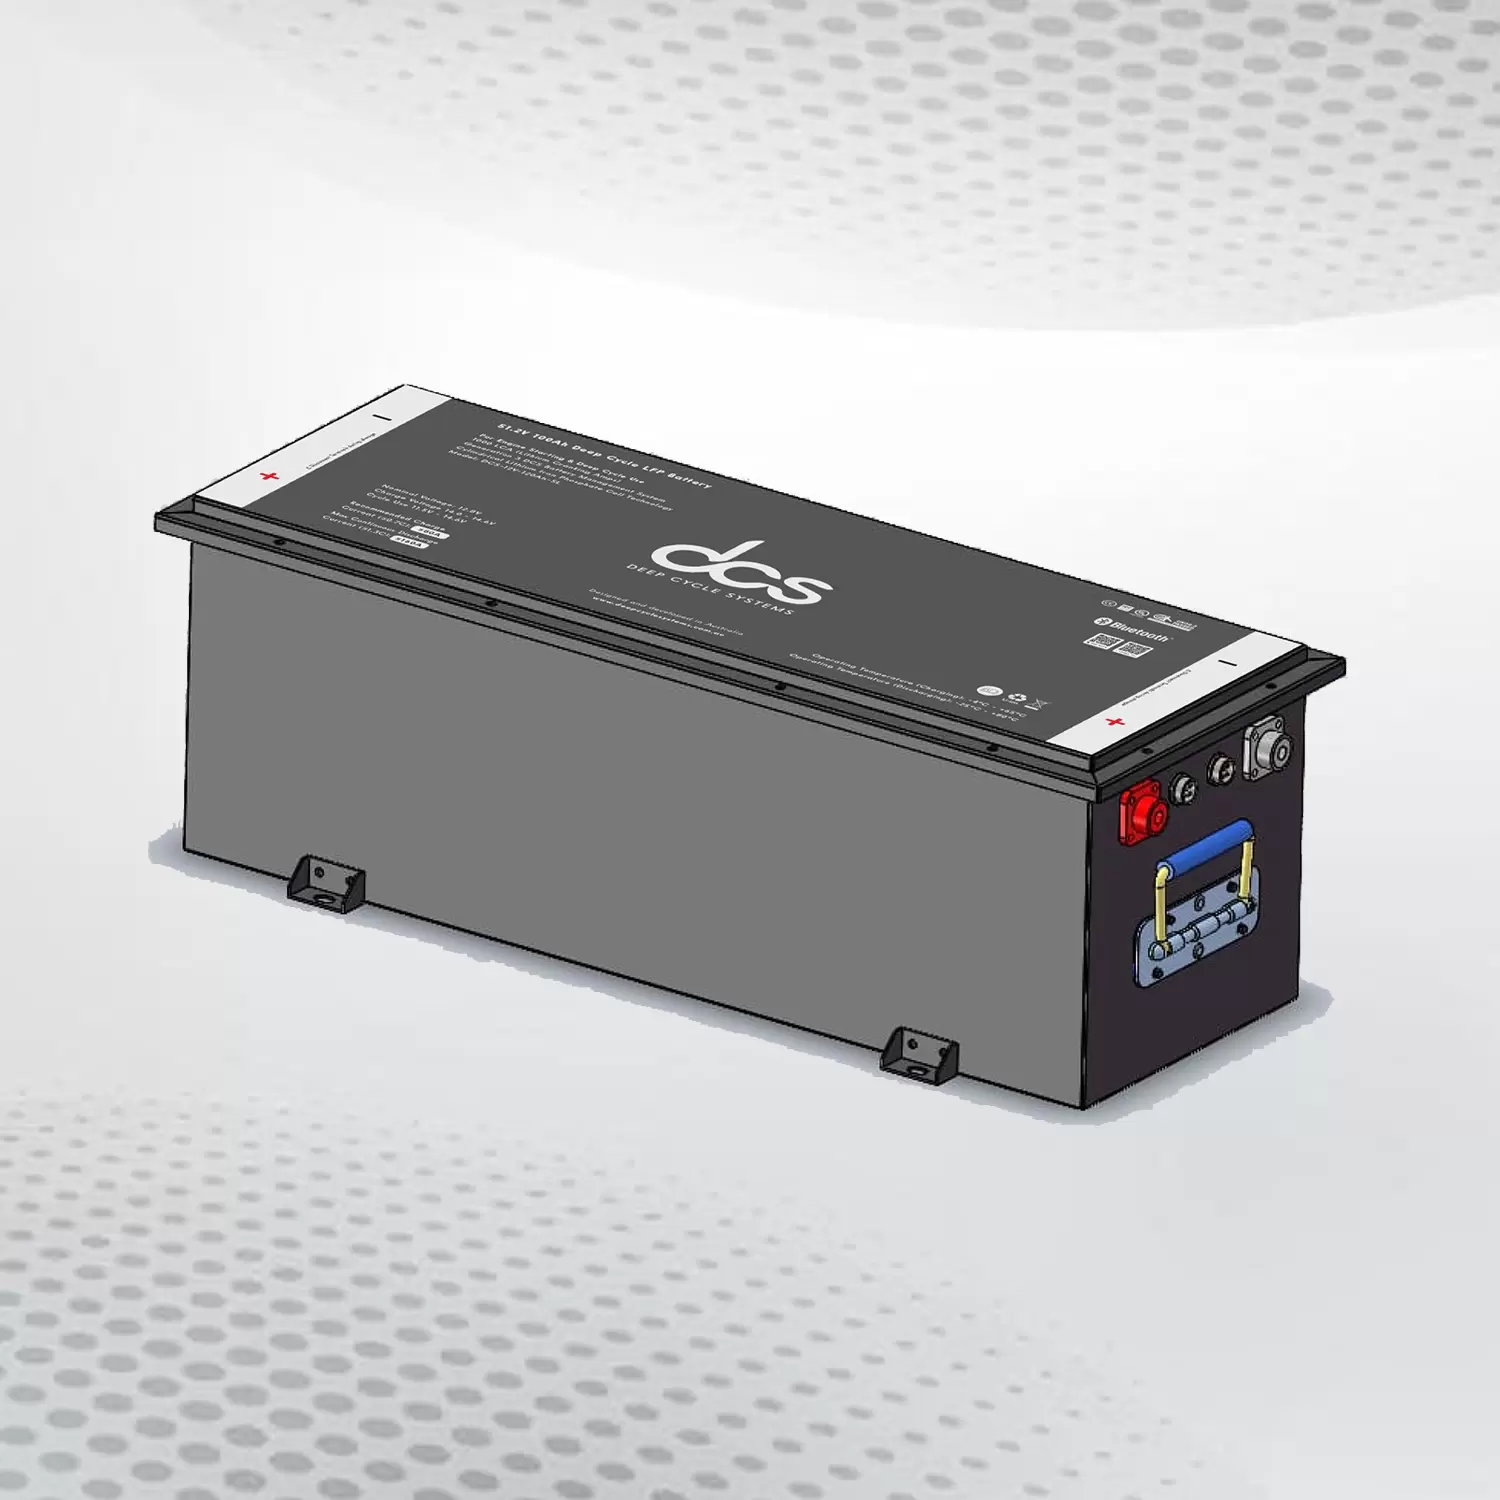 Why Choose 48v Lithium Ion? The Advantages Uncovered